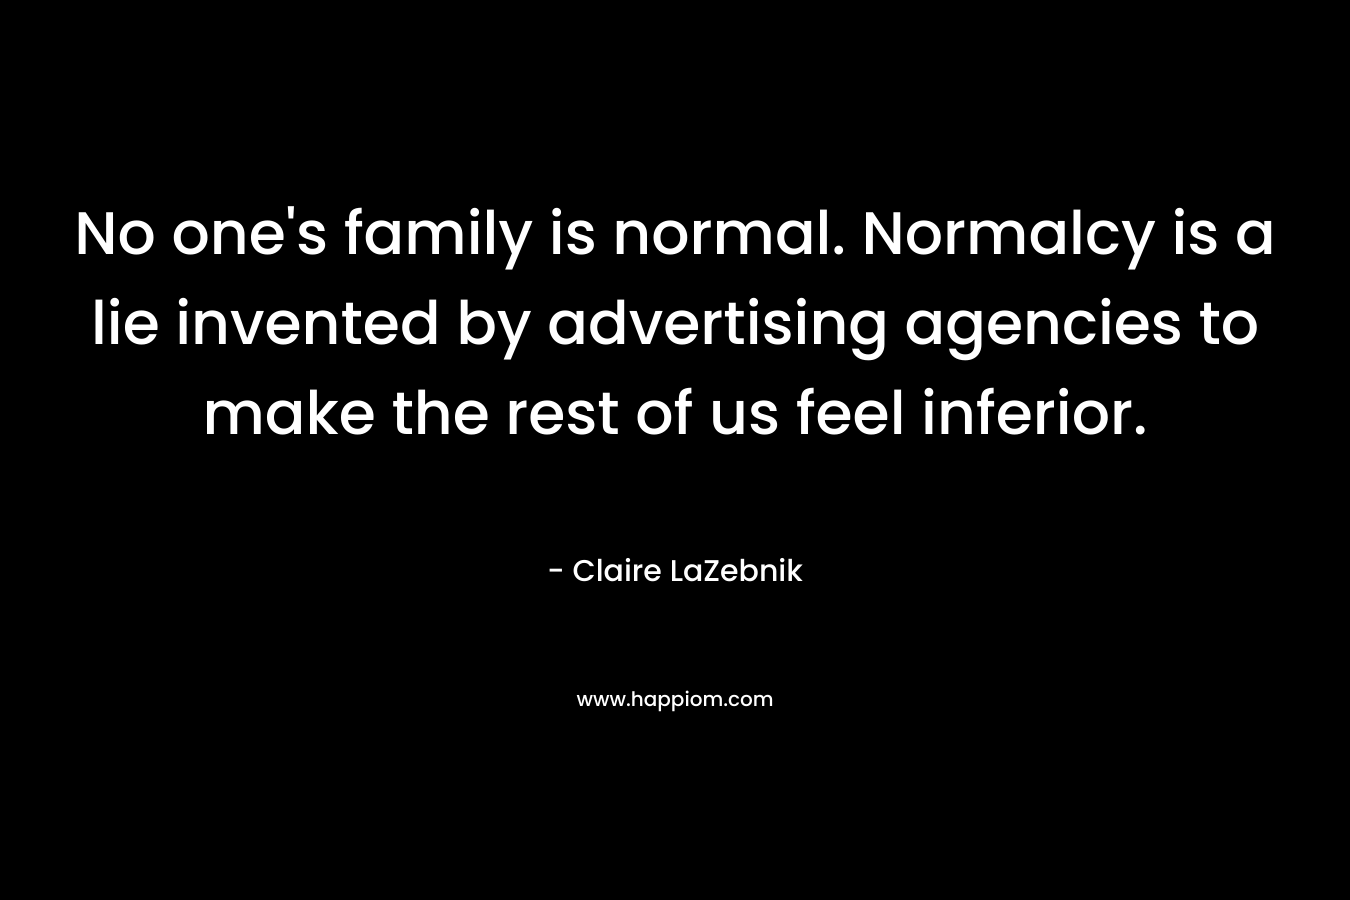 No one's family is normal. Normalcy is a lie invented by advertising agencies to make the rest of us feel inferior.